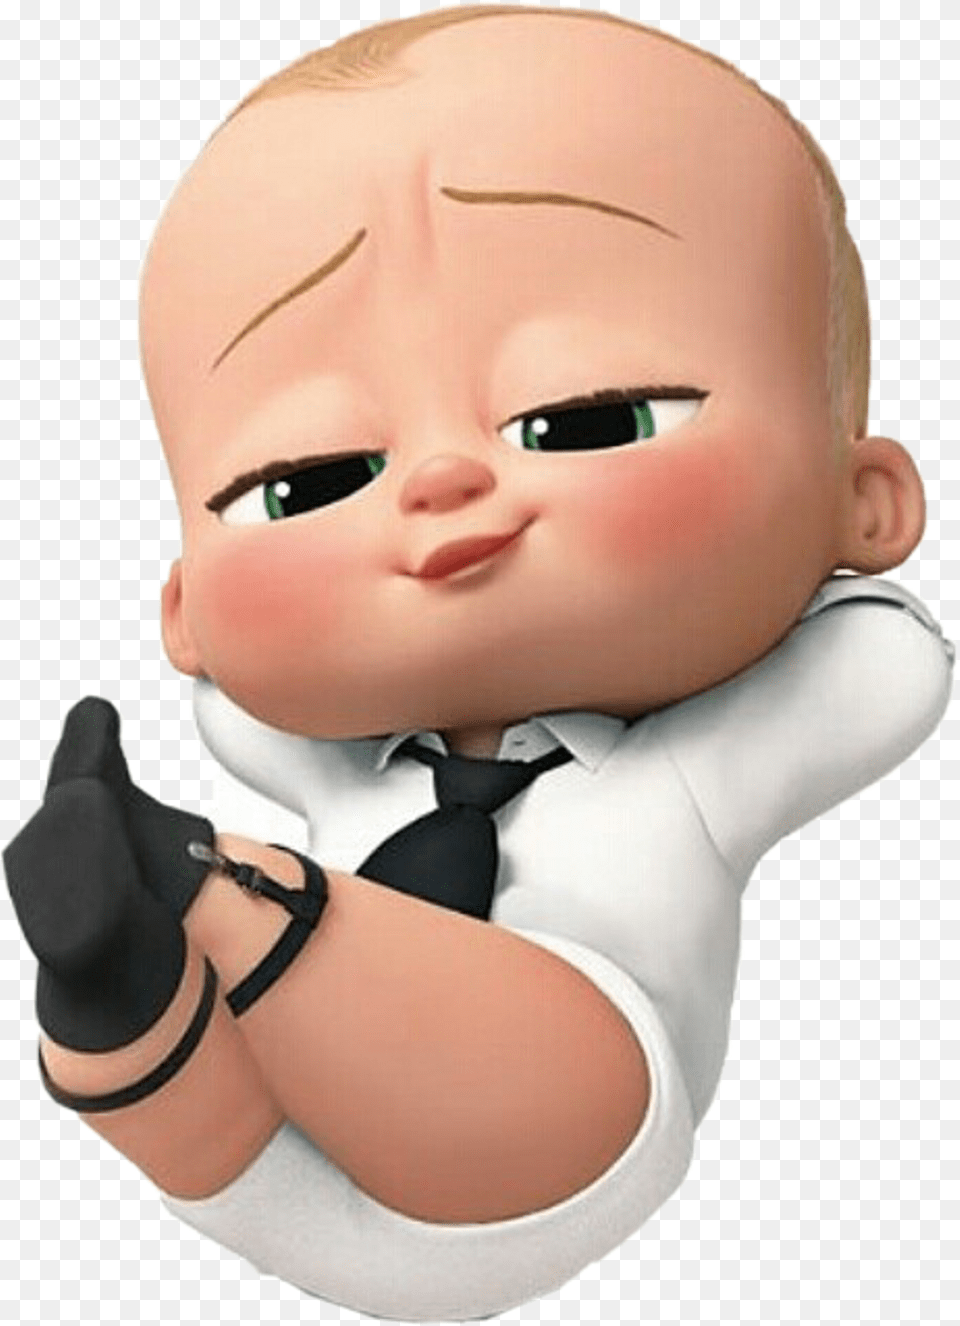 Boss Baby In Diaper, Doll, Toy, Person, Face Png